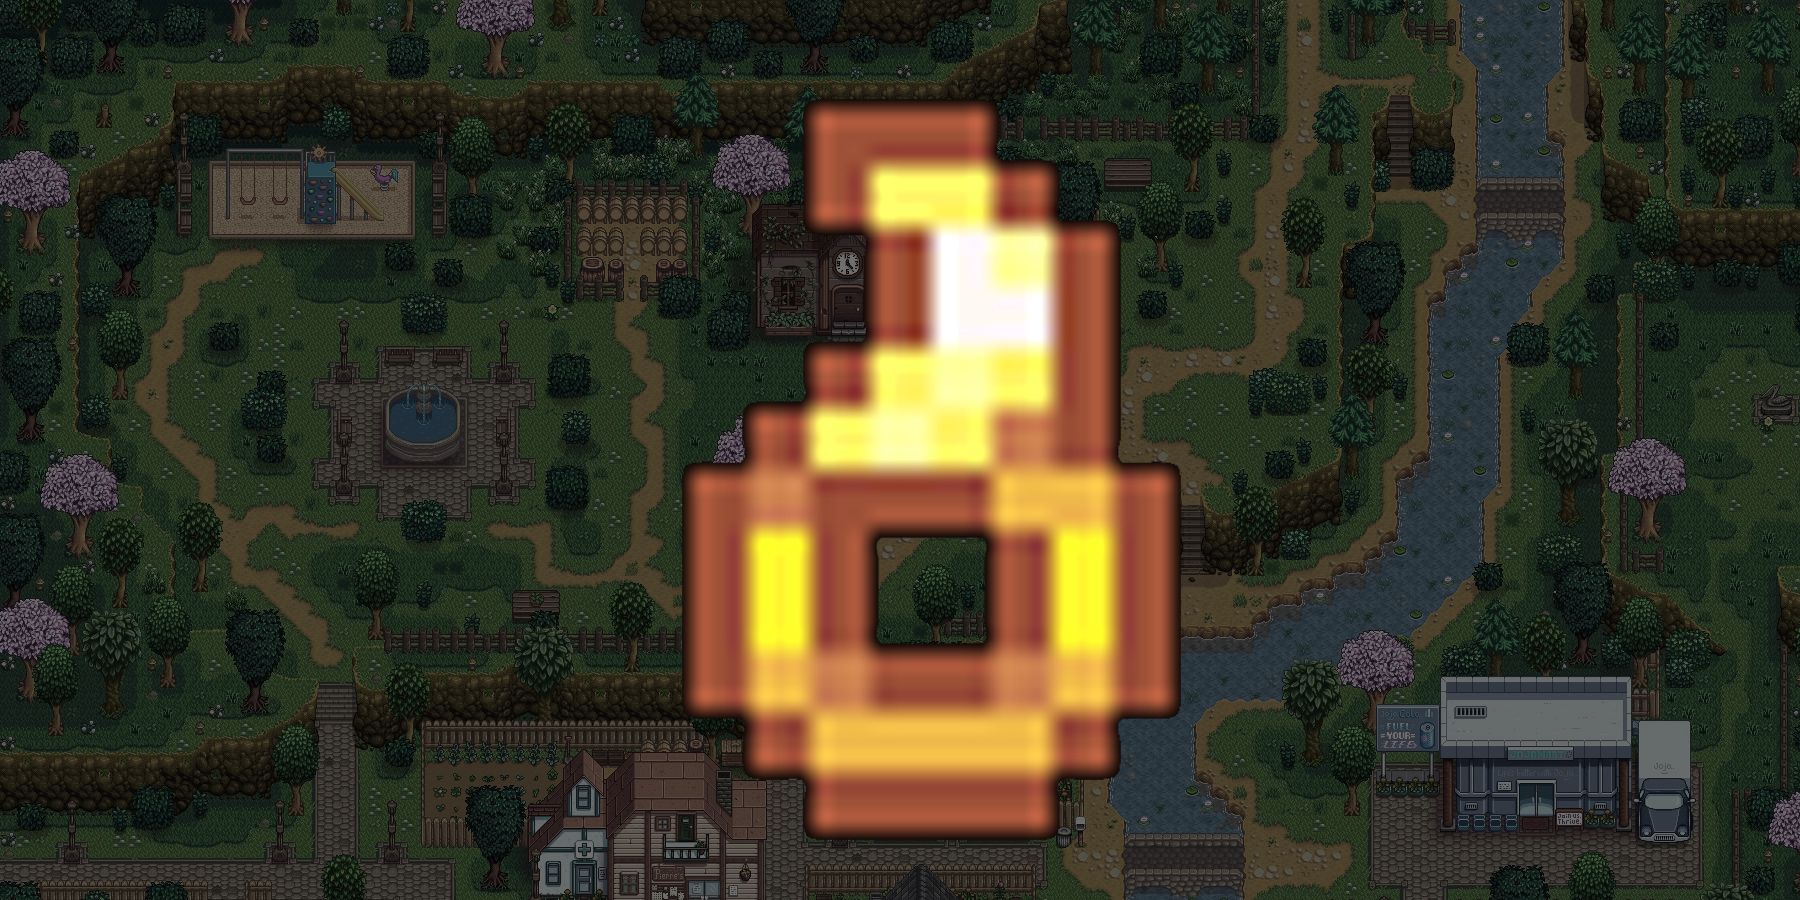 The Lucky Ring in its item form in Stardew Valley